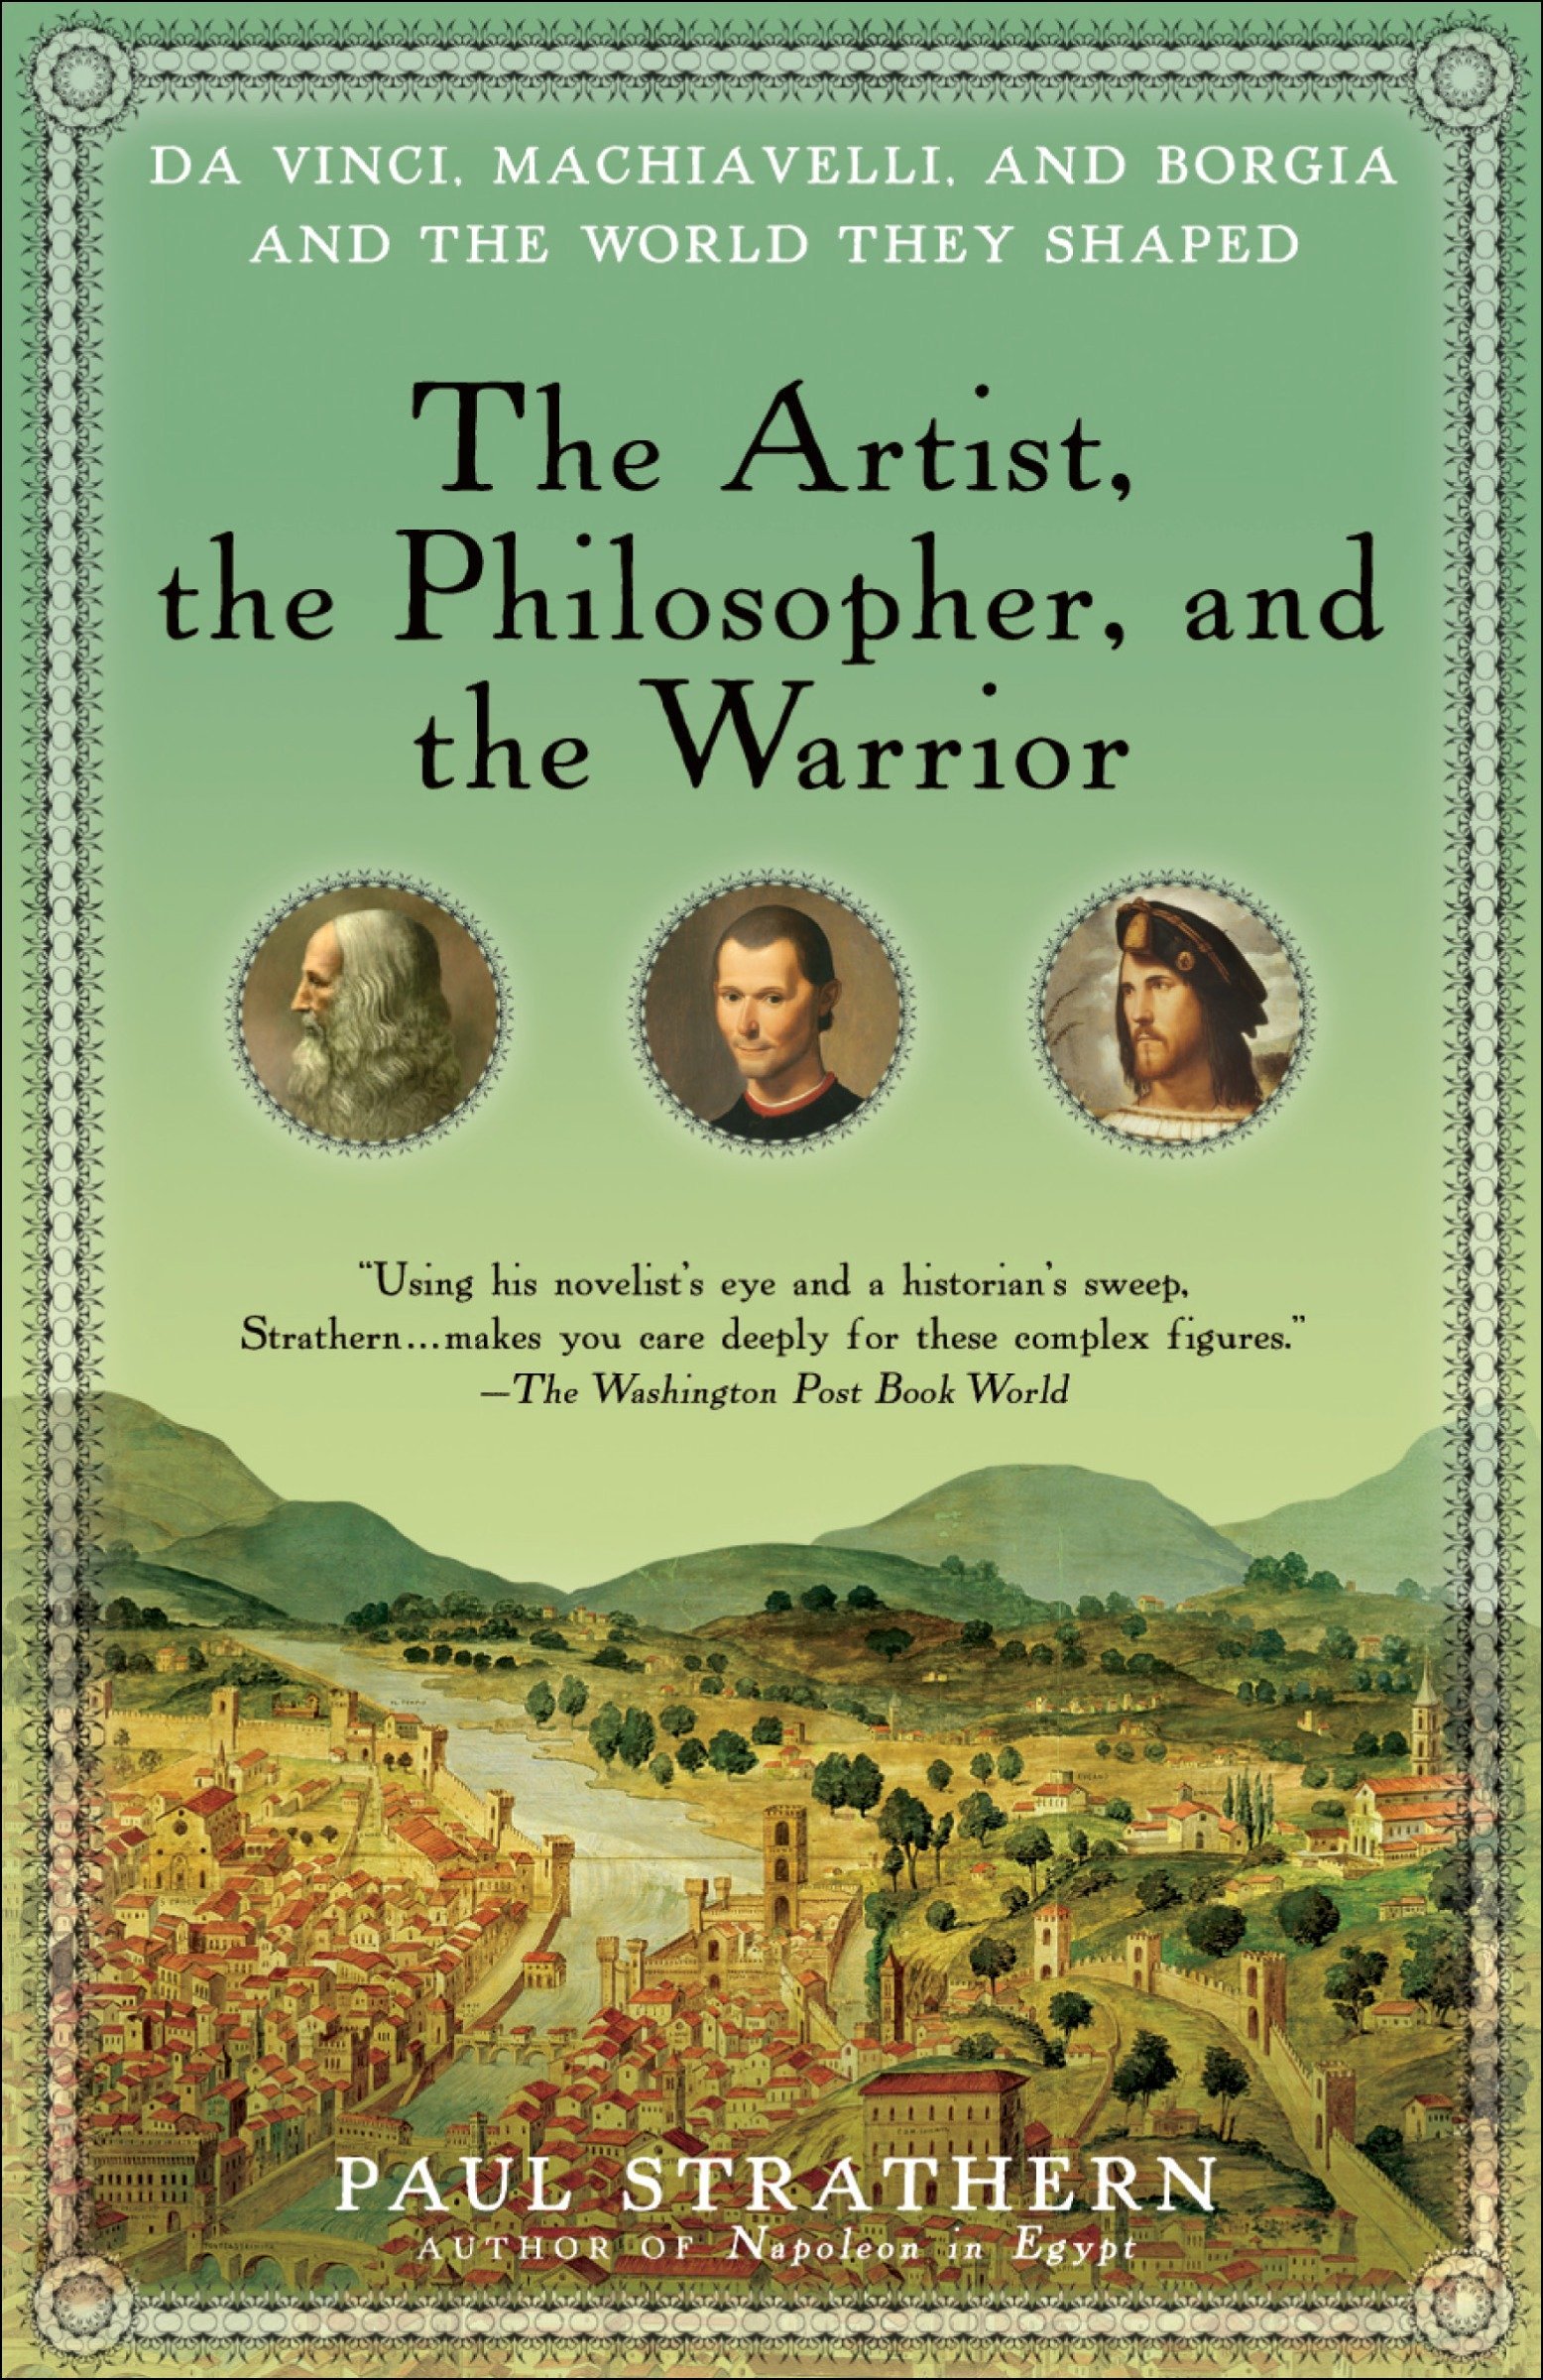 The Artist, the Philosopher, and the Warrior: The Intersecting Lives of Da Vinci, Machiavelli, and Borgia and the World They Shaped